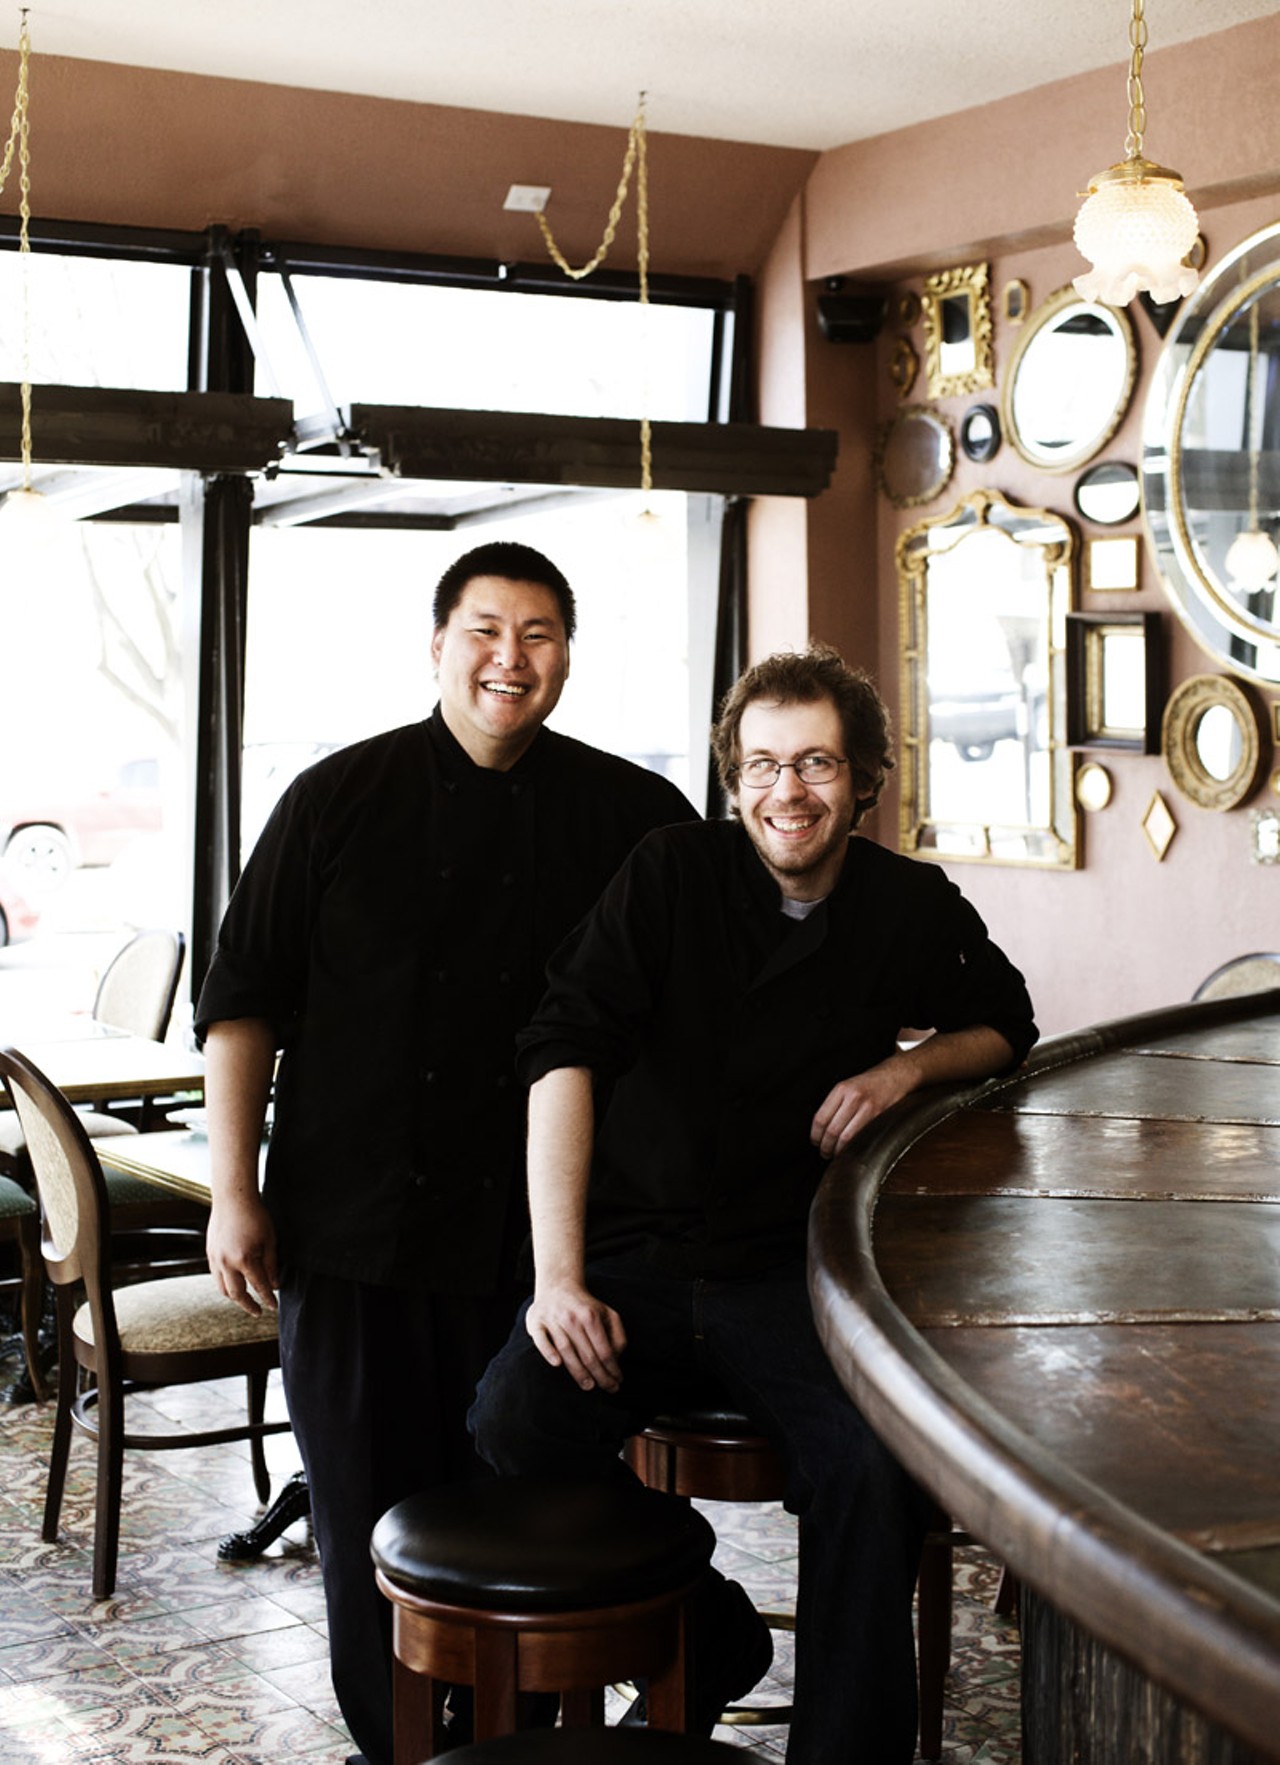 On left is Head Chef Je Kang and, on right, is Sous Chef Jon Huntley.